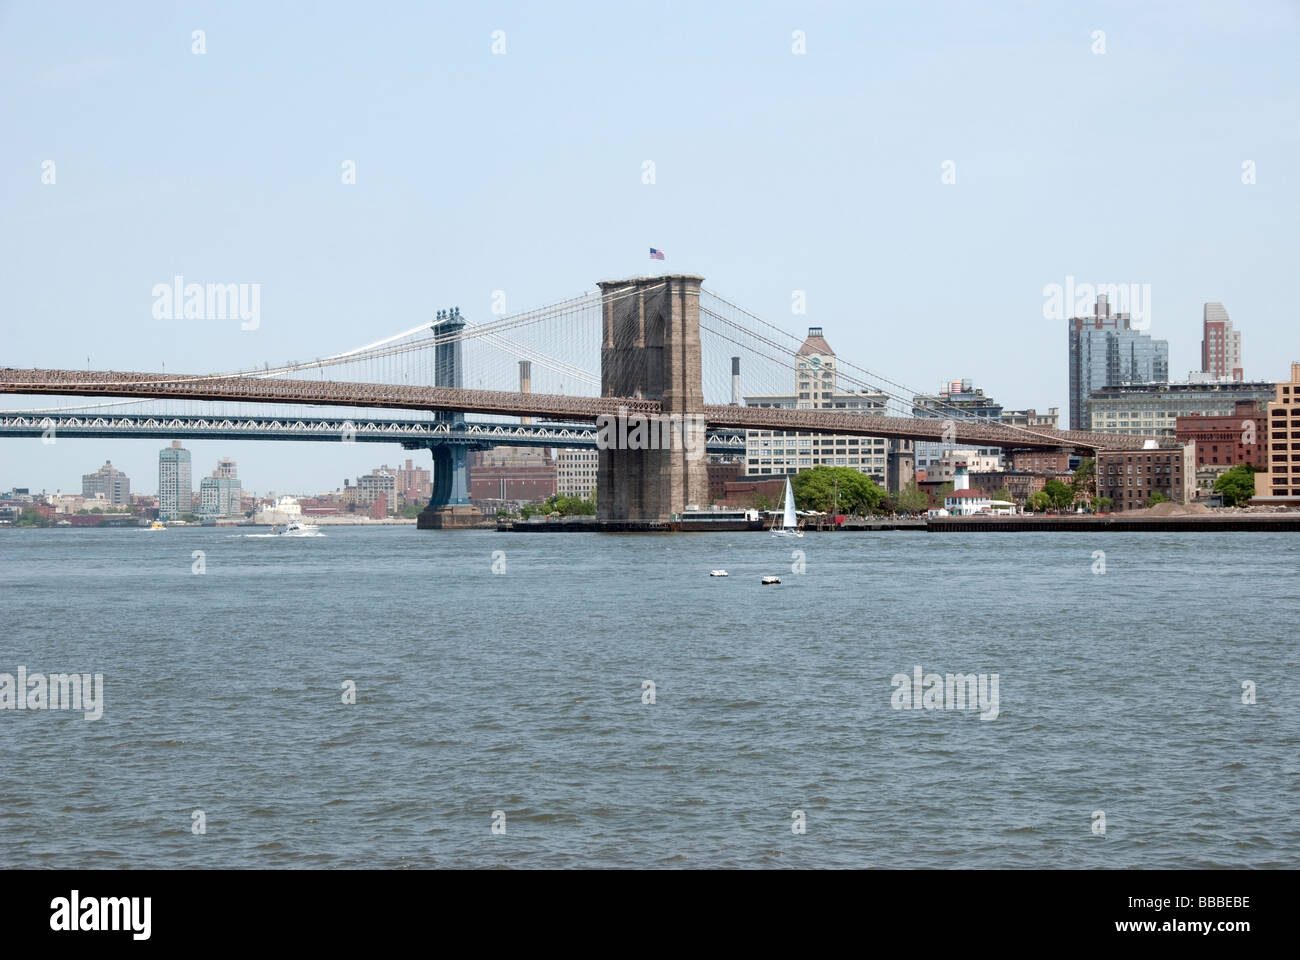 view of the East River with the Brooklyn & Manhattan bridges and Brooklyn waterfront, New York Stock Photo